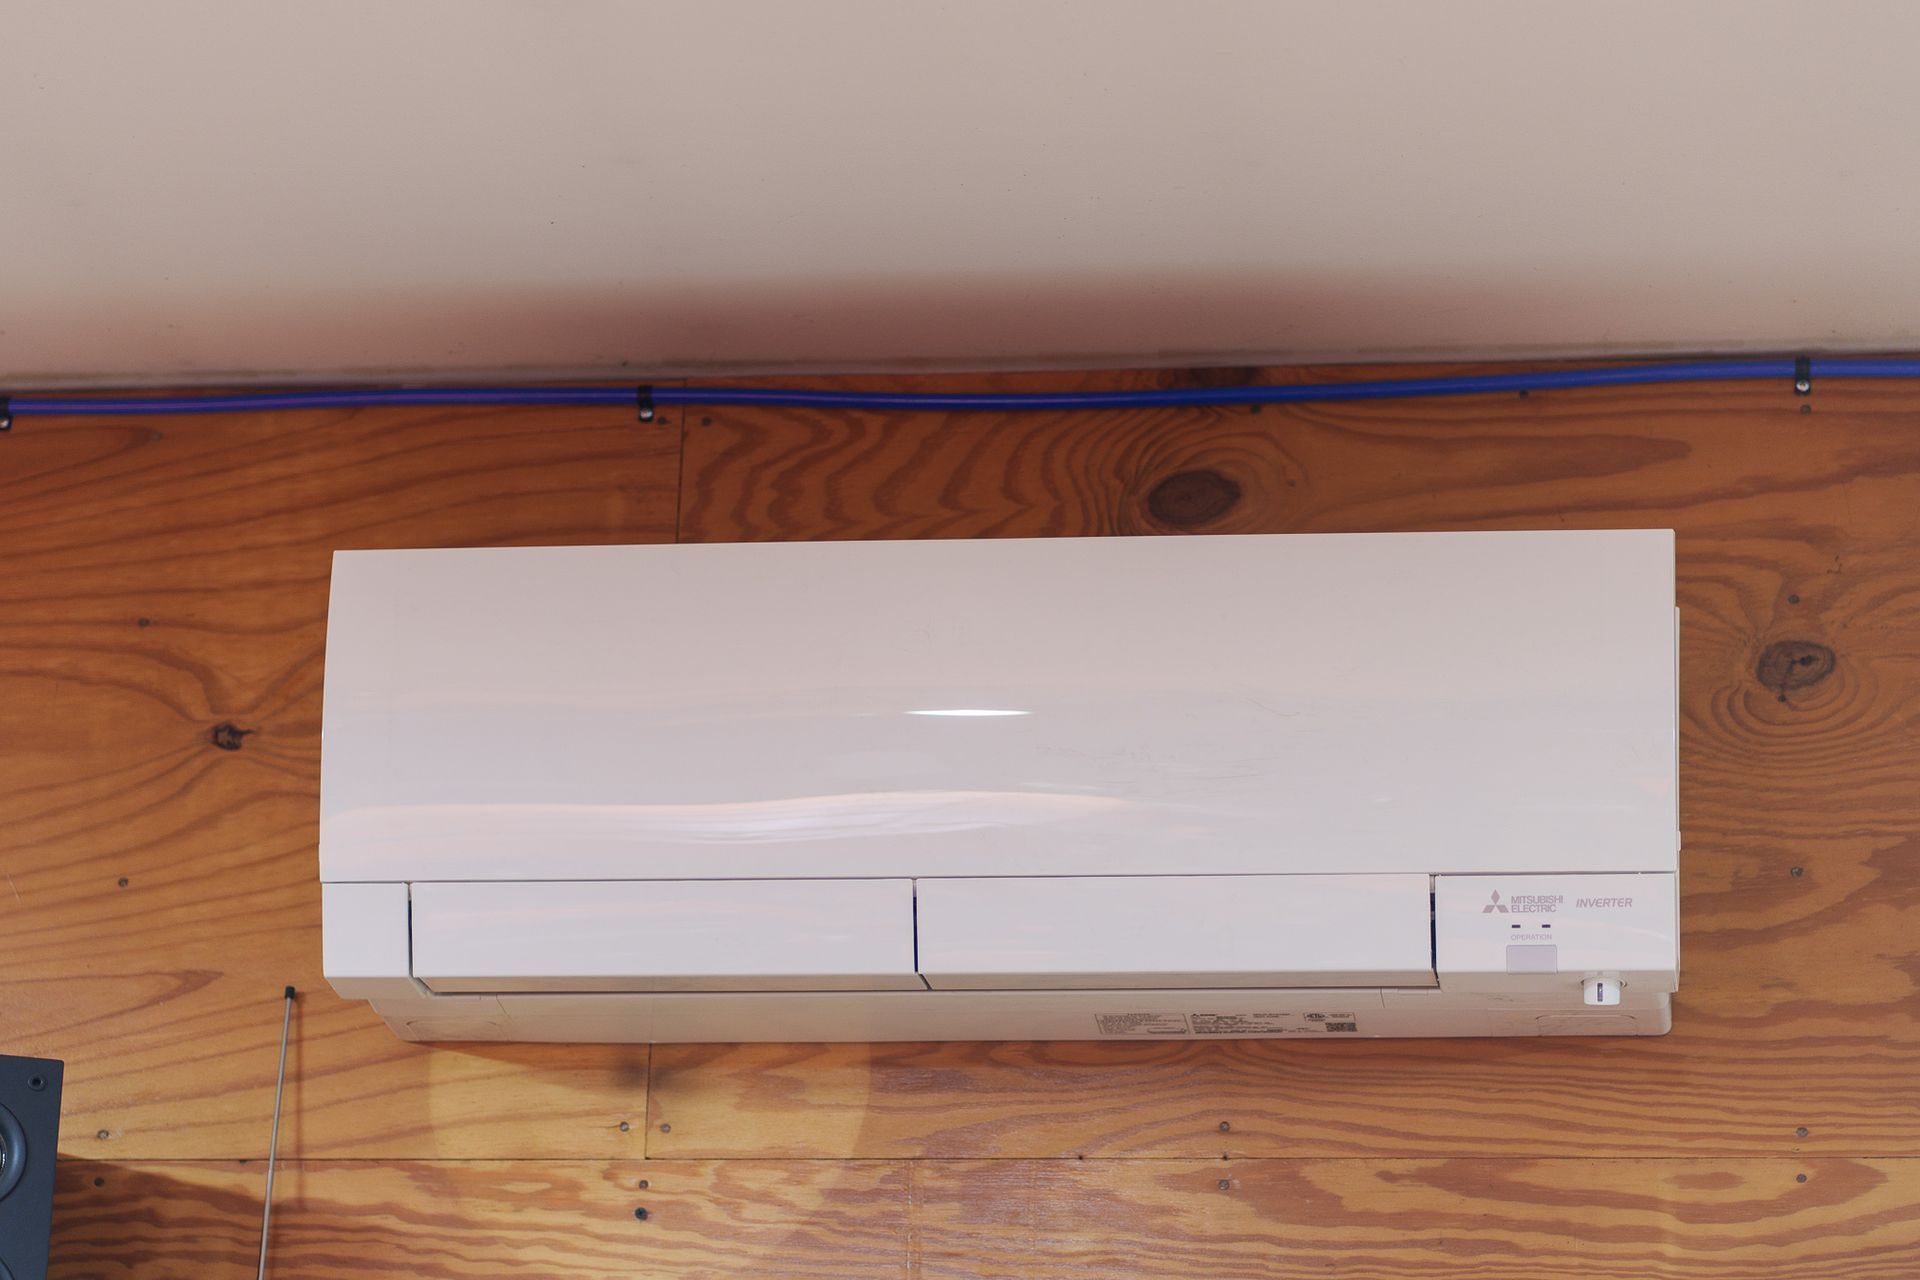 Prevett Heating and Cooling |A white air conditioner is hanging on a wooden wall.